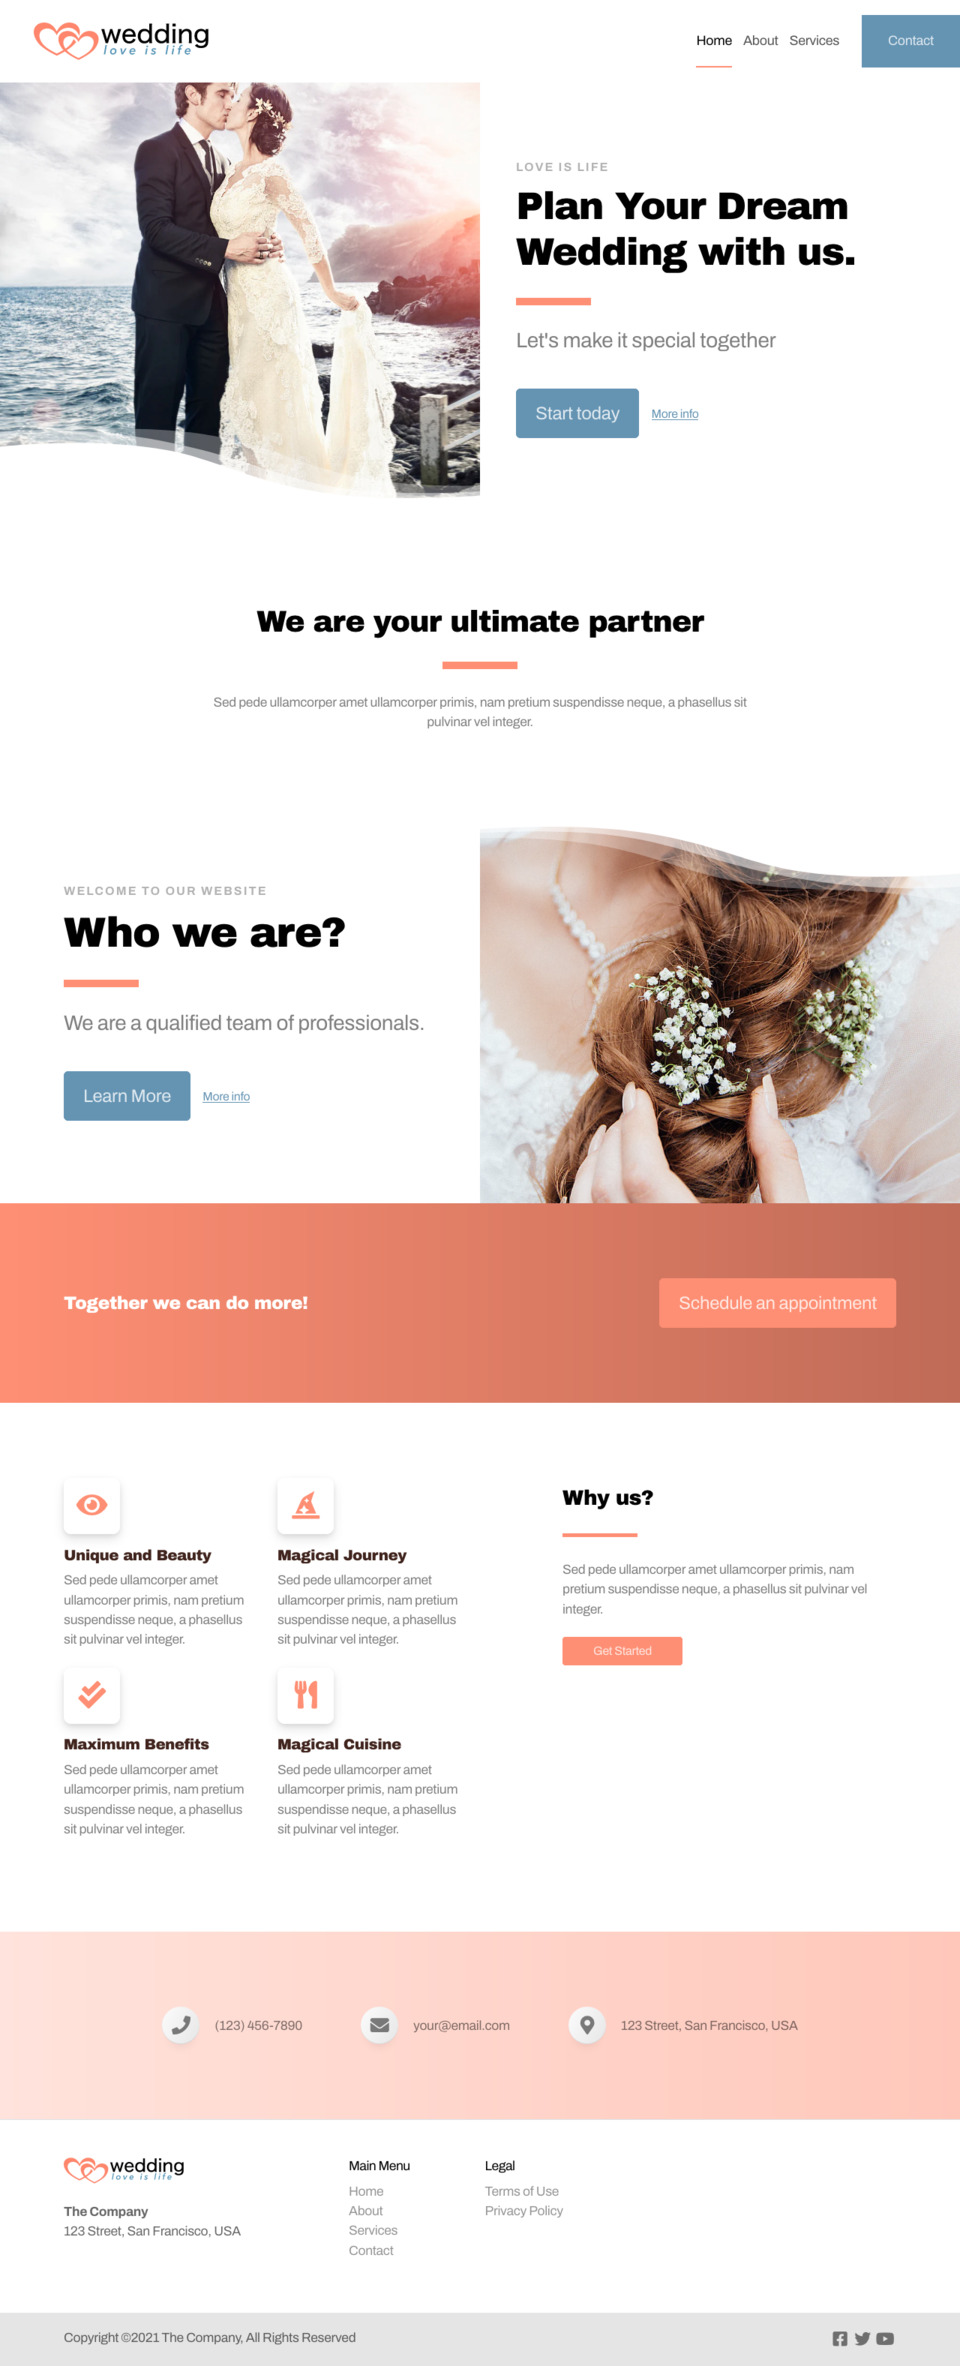 Wedding 2 Website Template - Ideal for couples planning their wedding, photographers capturing love stories, event planners organizing romantic events, and small businesses in the wedding industry.